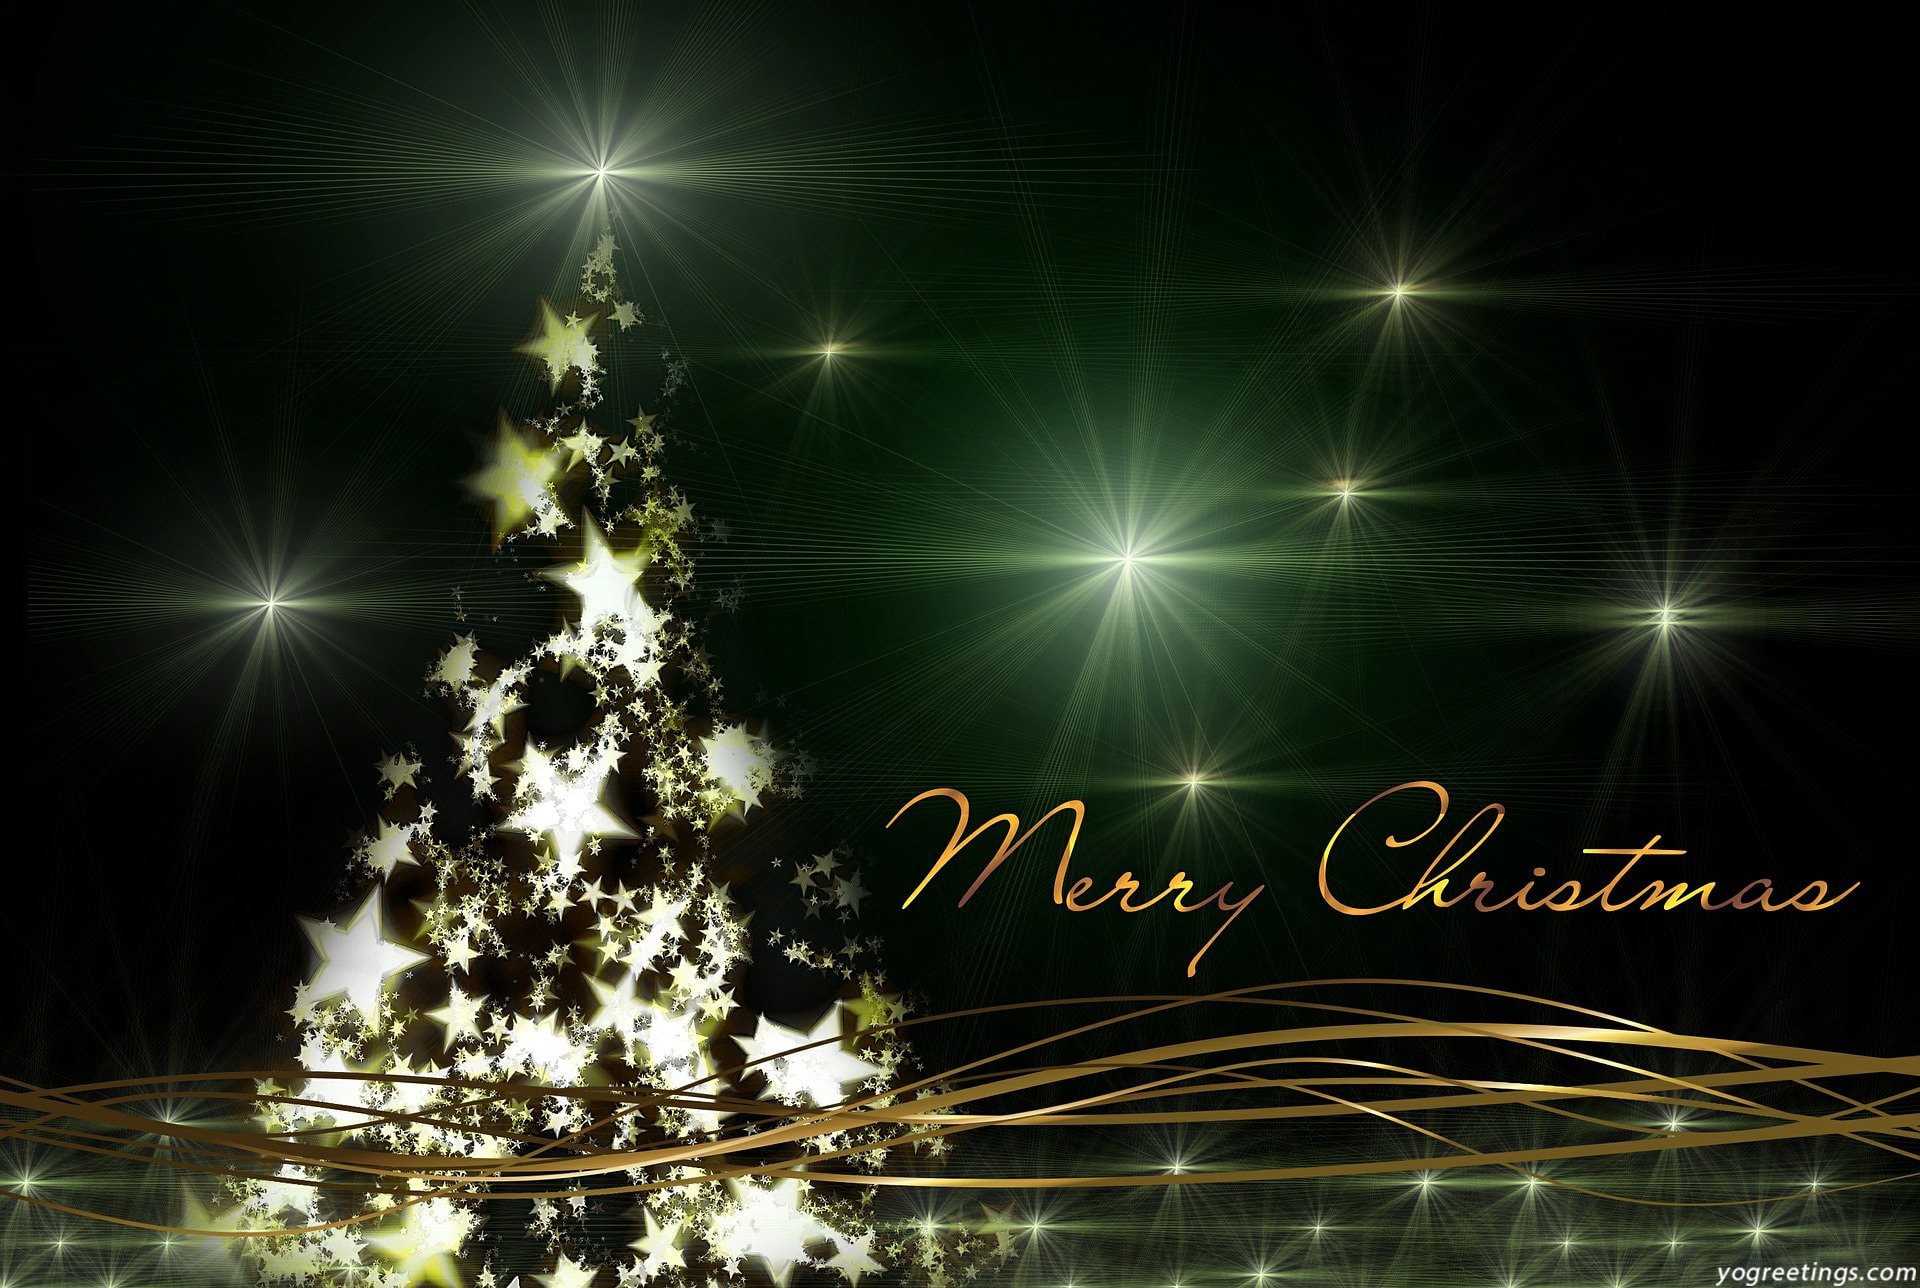 Merry Christmas Wallpaper Full HD Free Download - Images 7